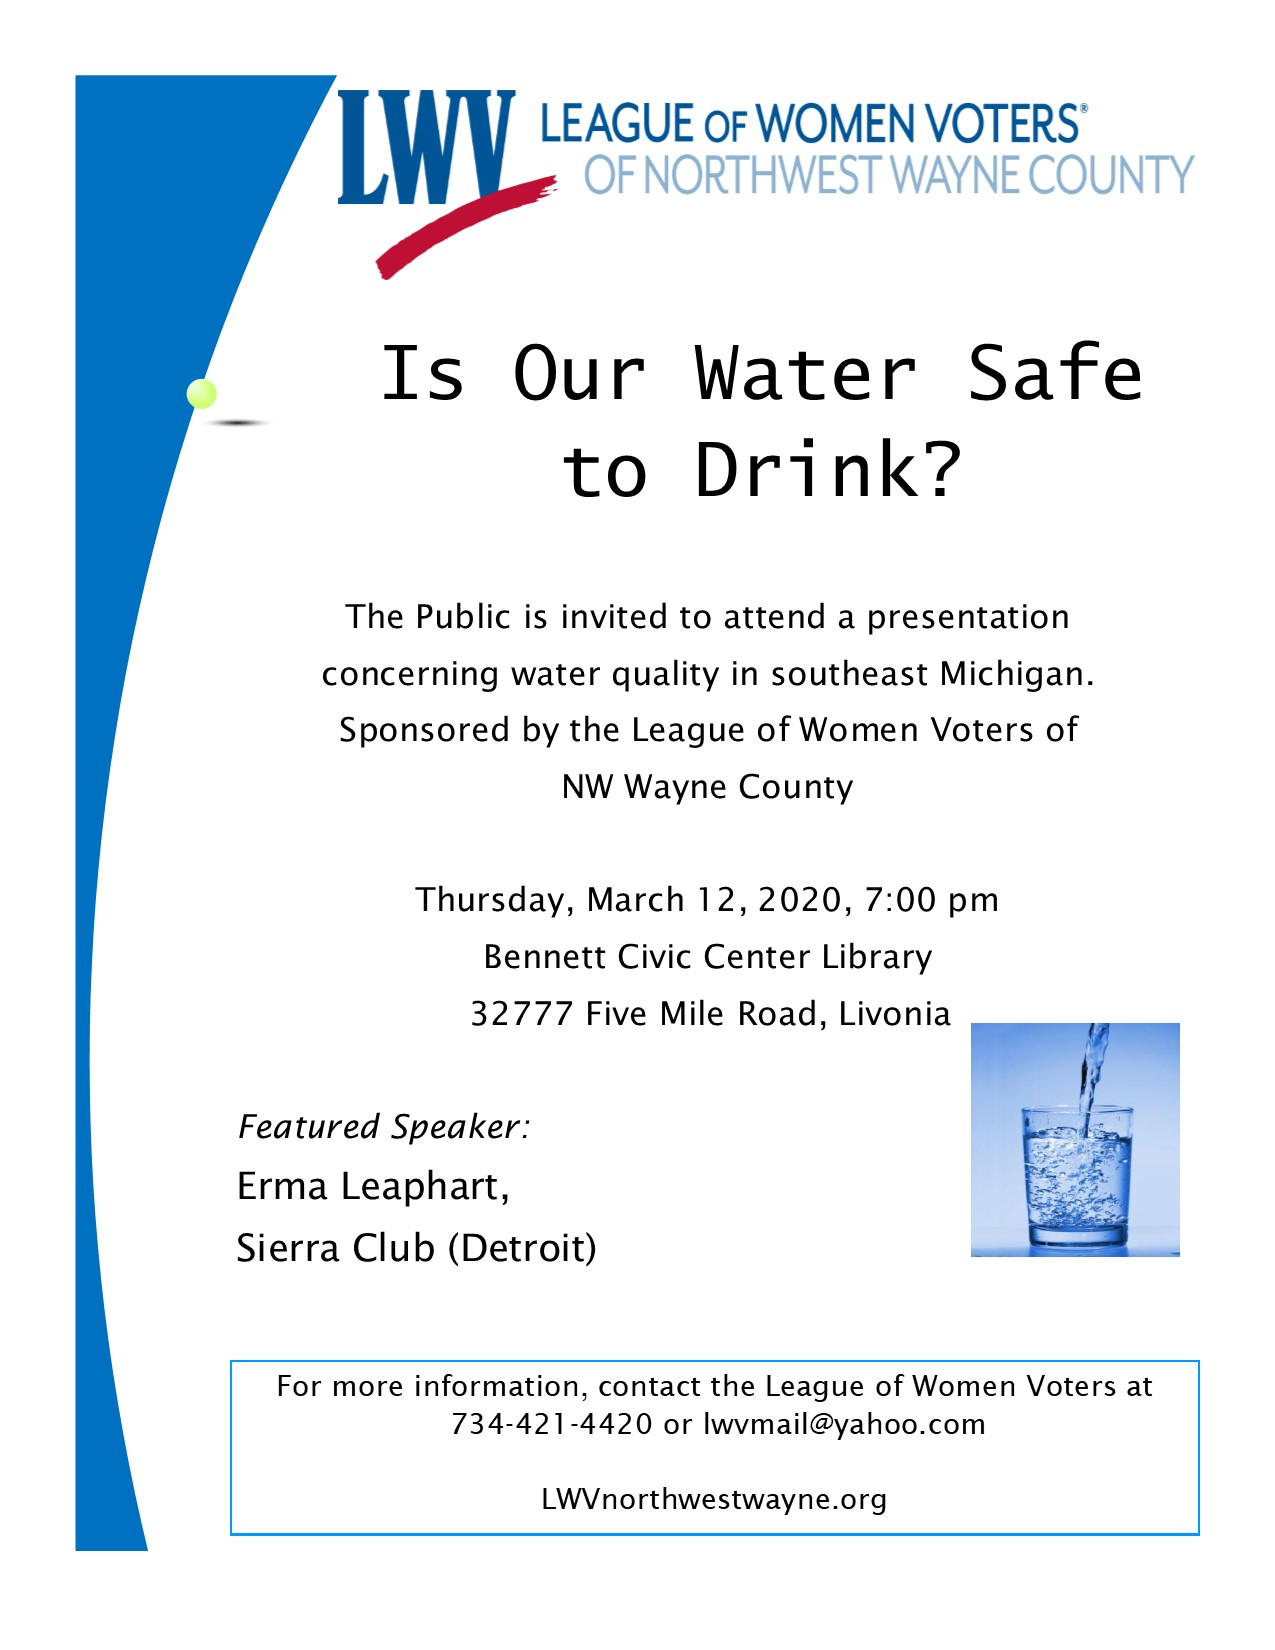 Flyer with details about 3-12-20 Water Meeting